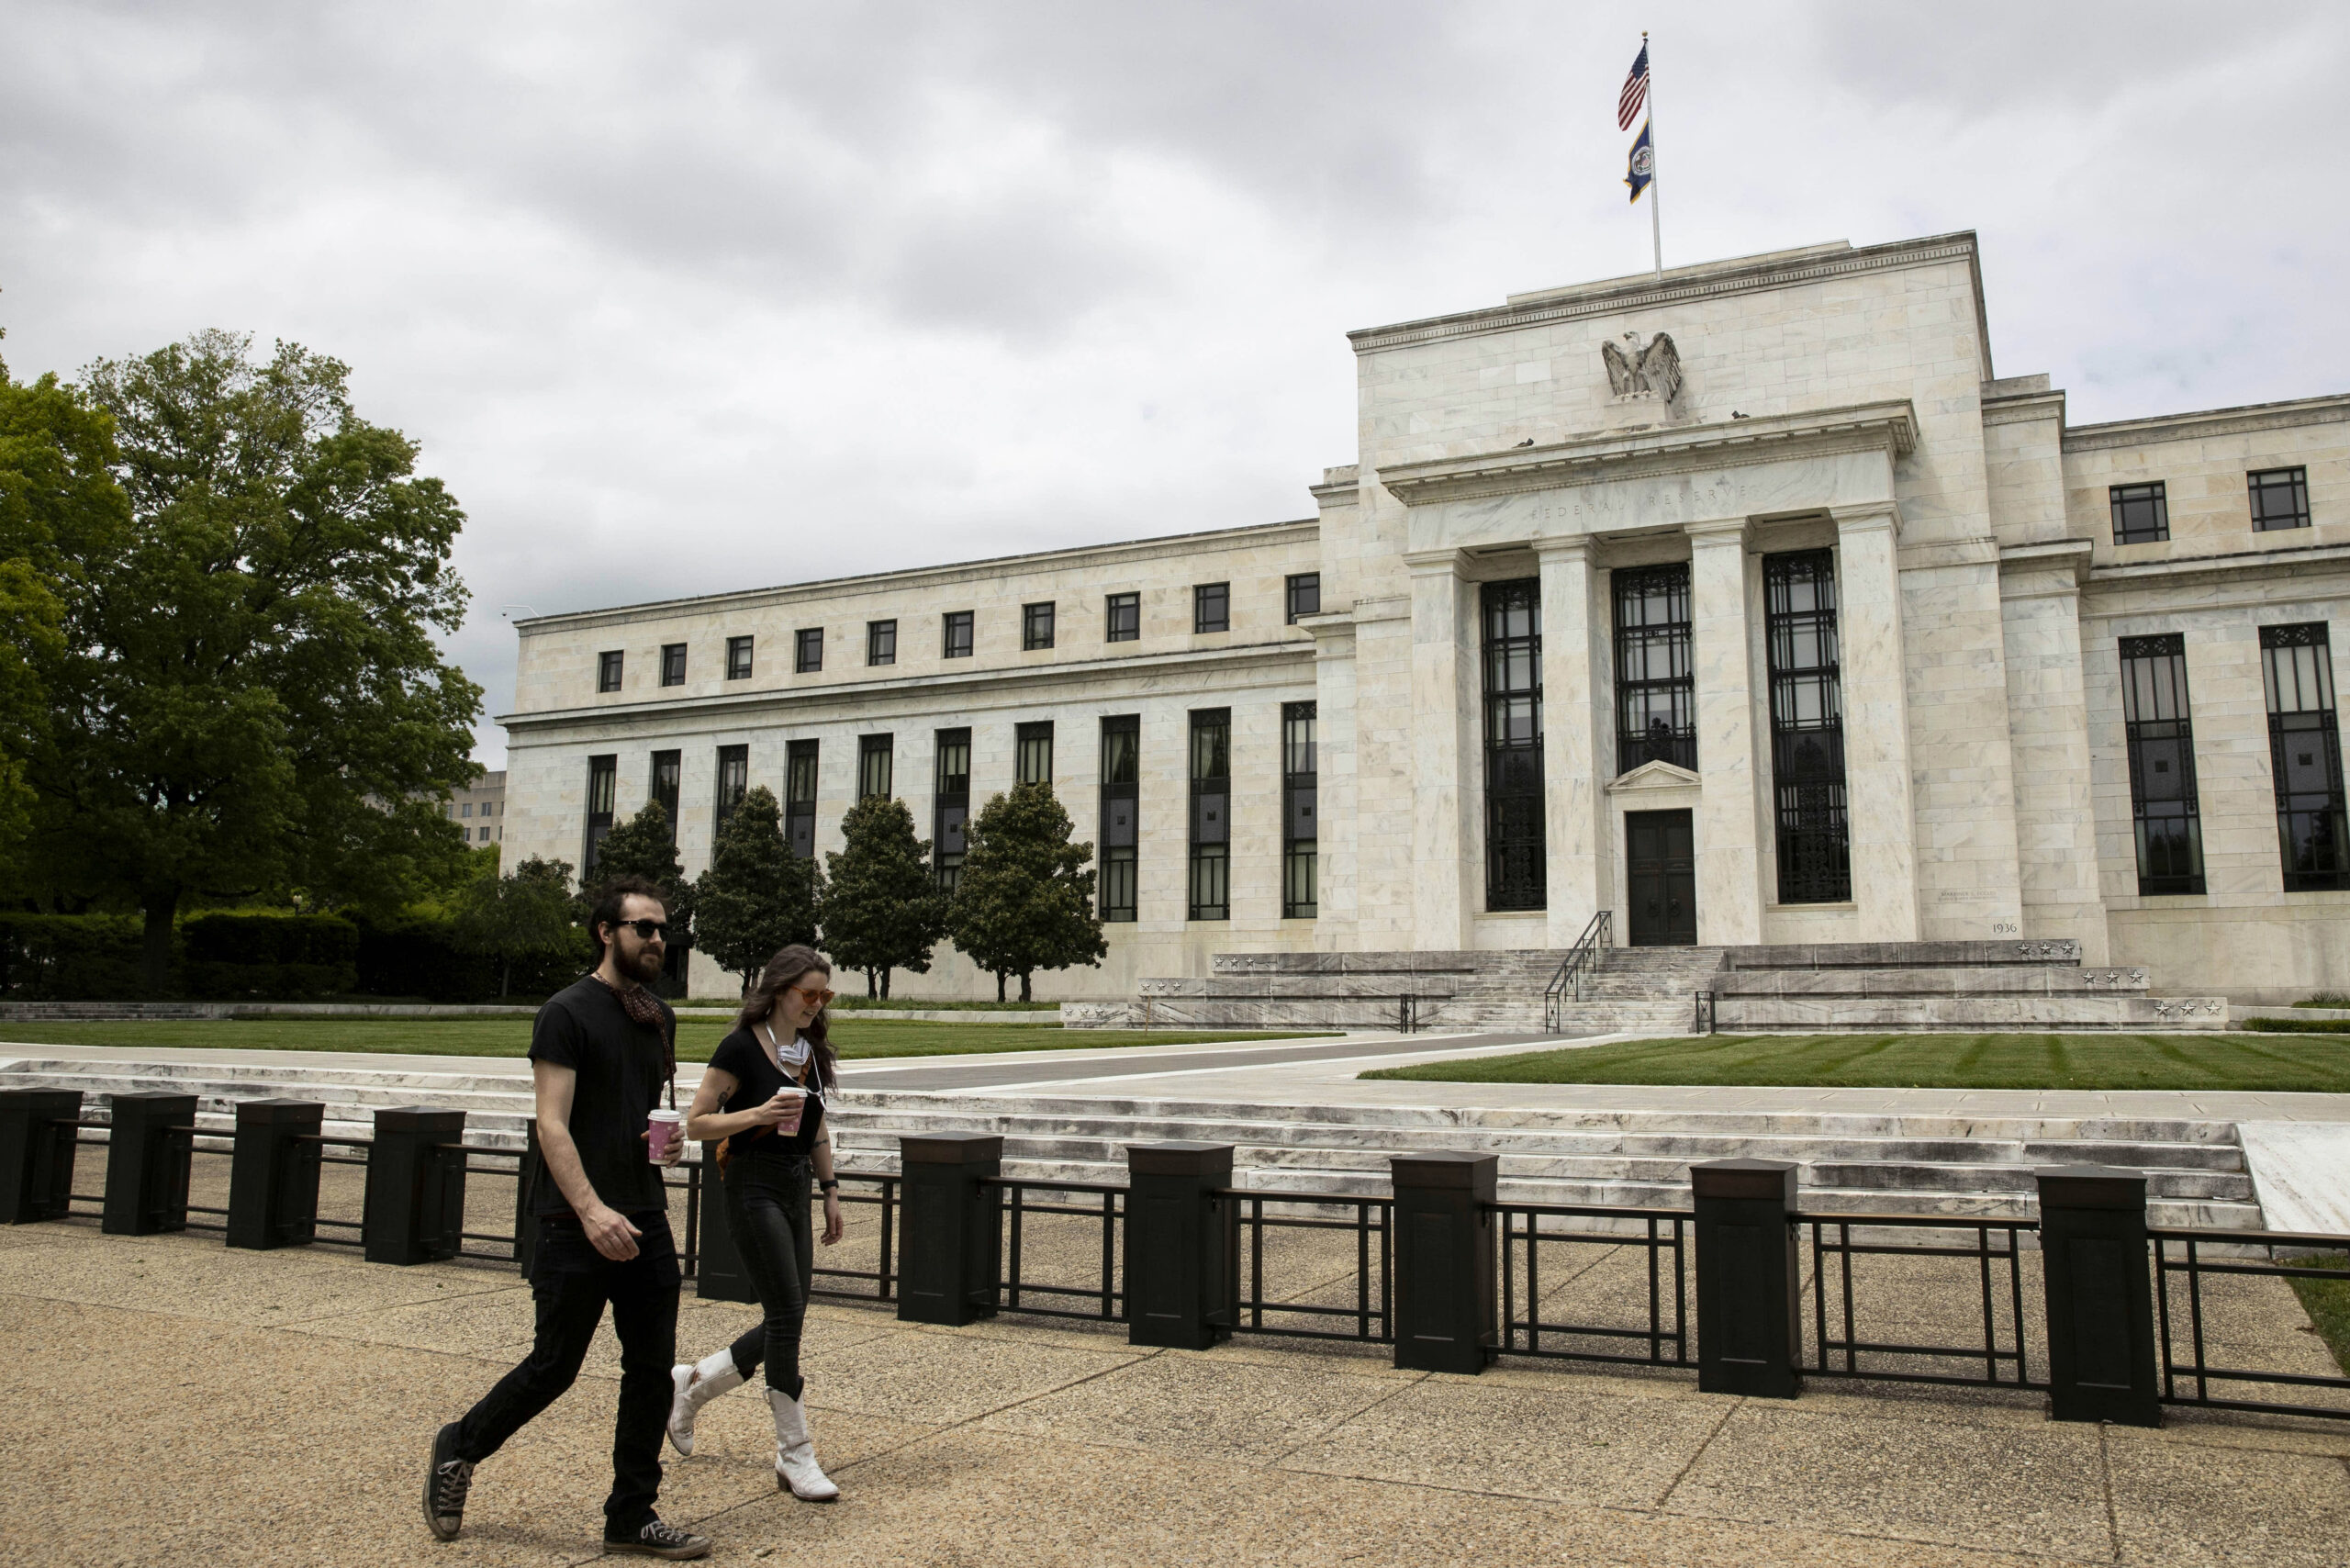 Stay invested whenever Fed hikes rates, stocks can still rally